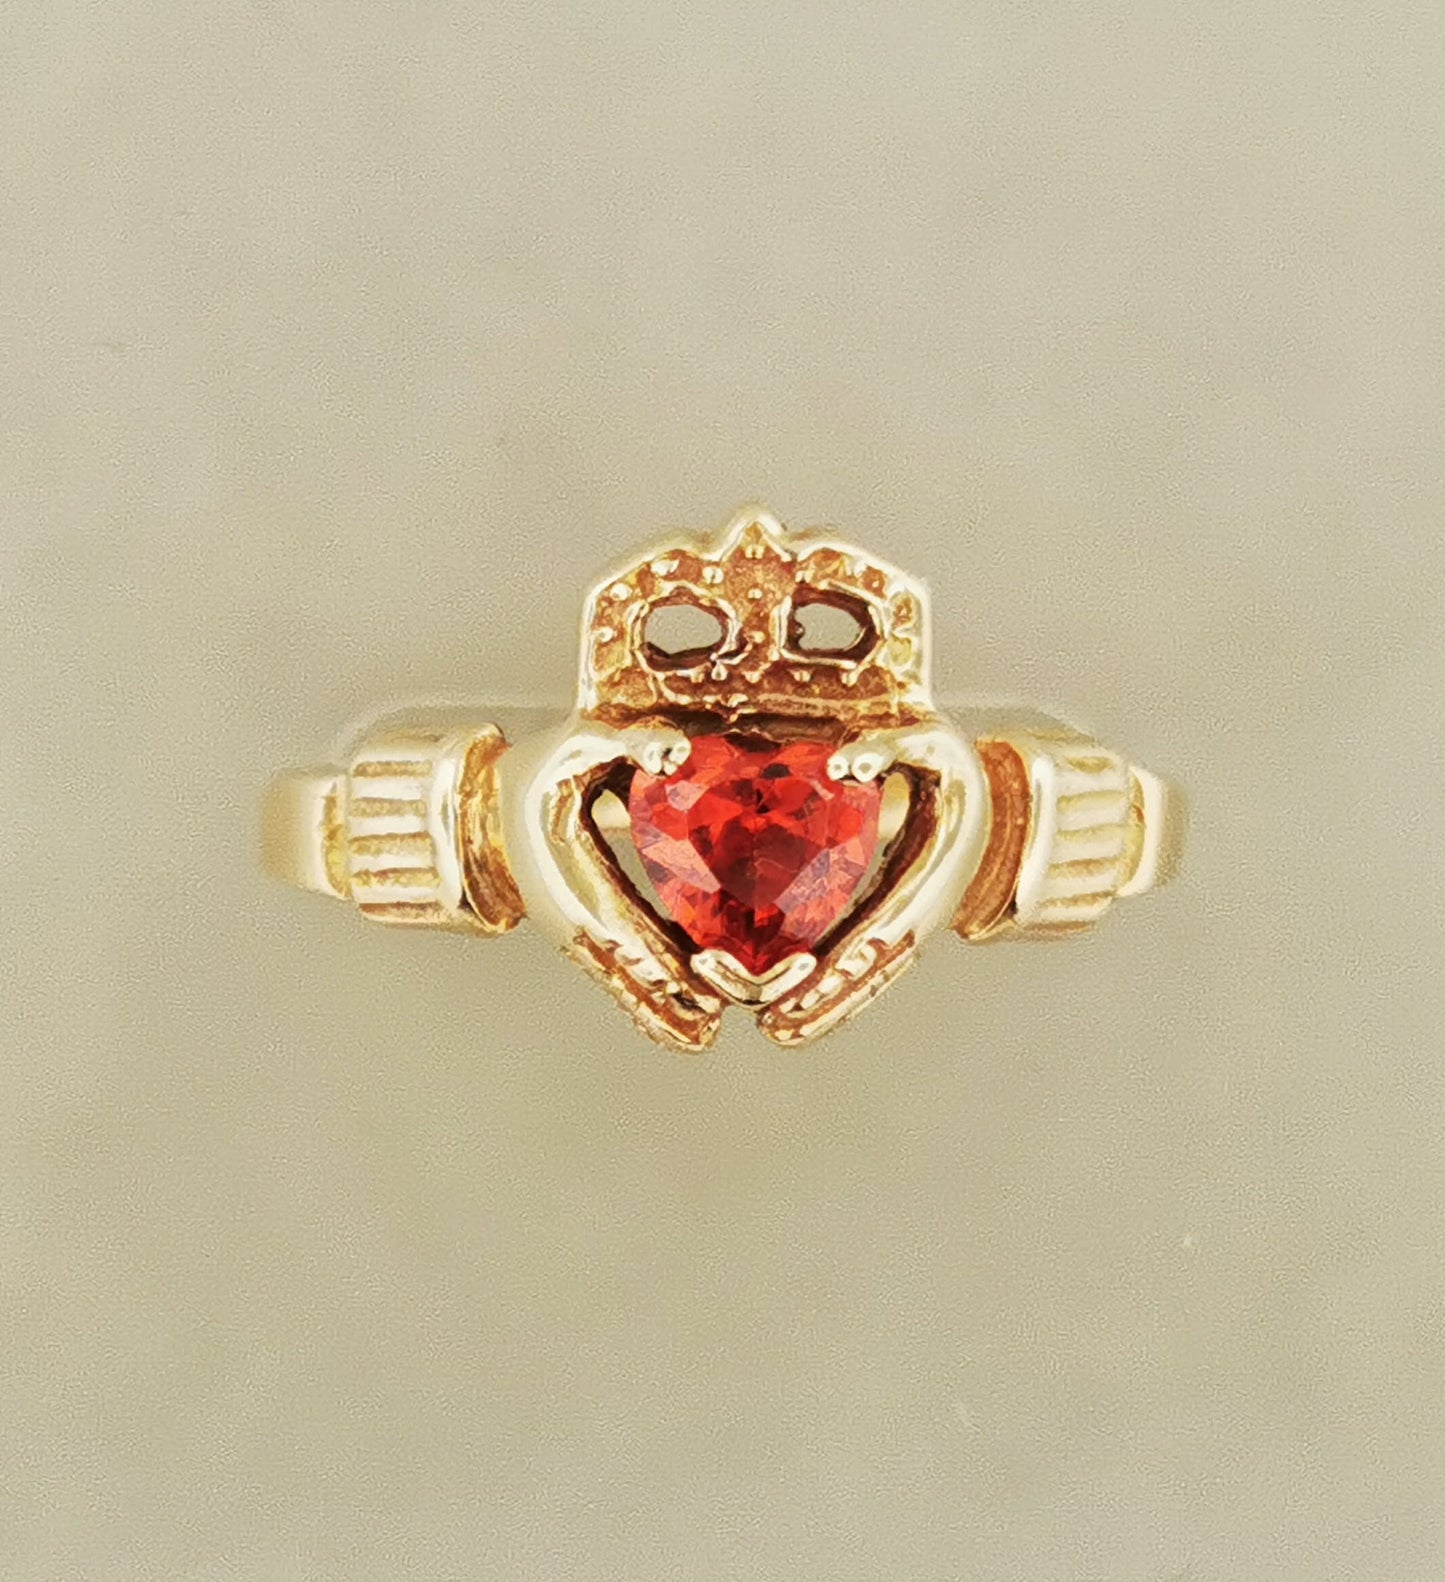 Claddagh Ring with Orange CZ Heart in Antique Bronze, Irish Celtic Claddagh Ring with Gemstone, Ladies Celtic Claddagh Ring with Gemstone, Birthstone Claddagh Ring